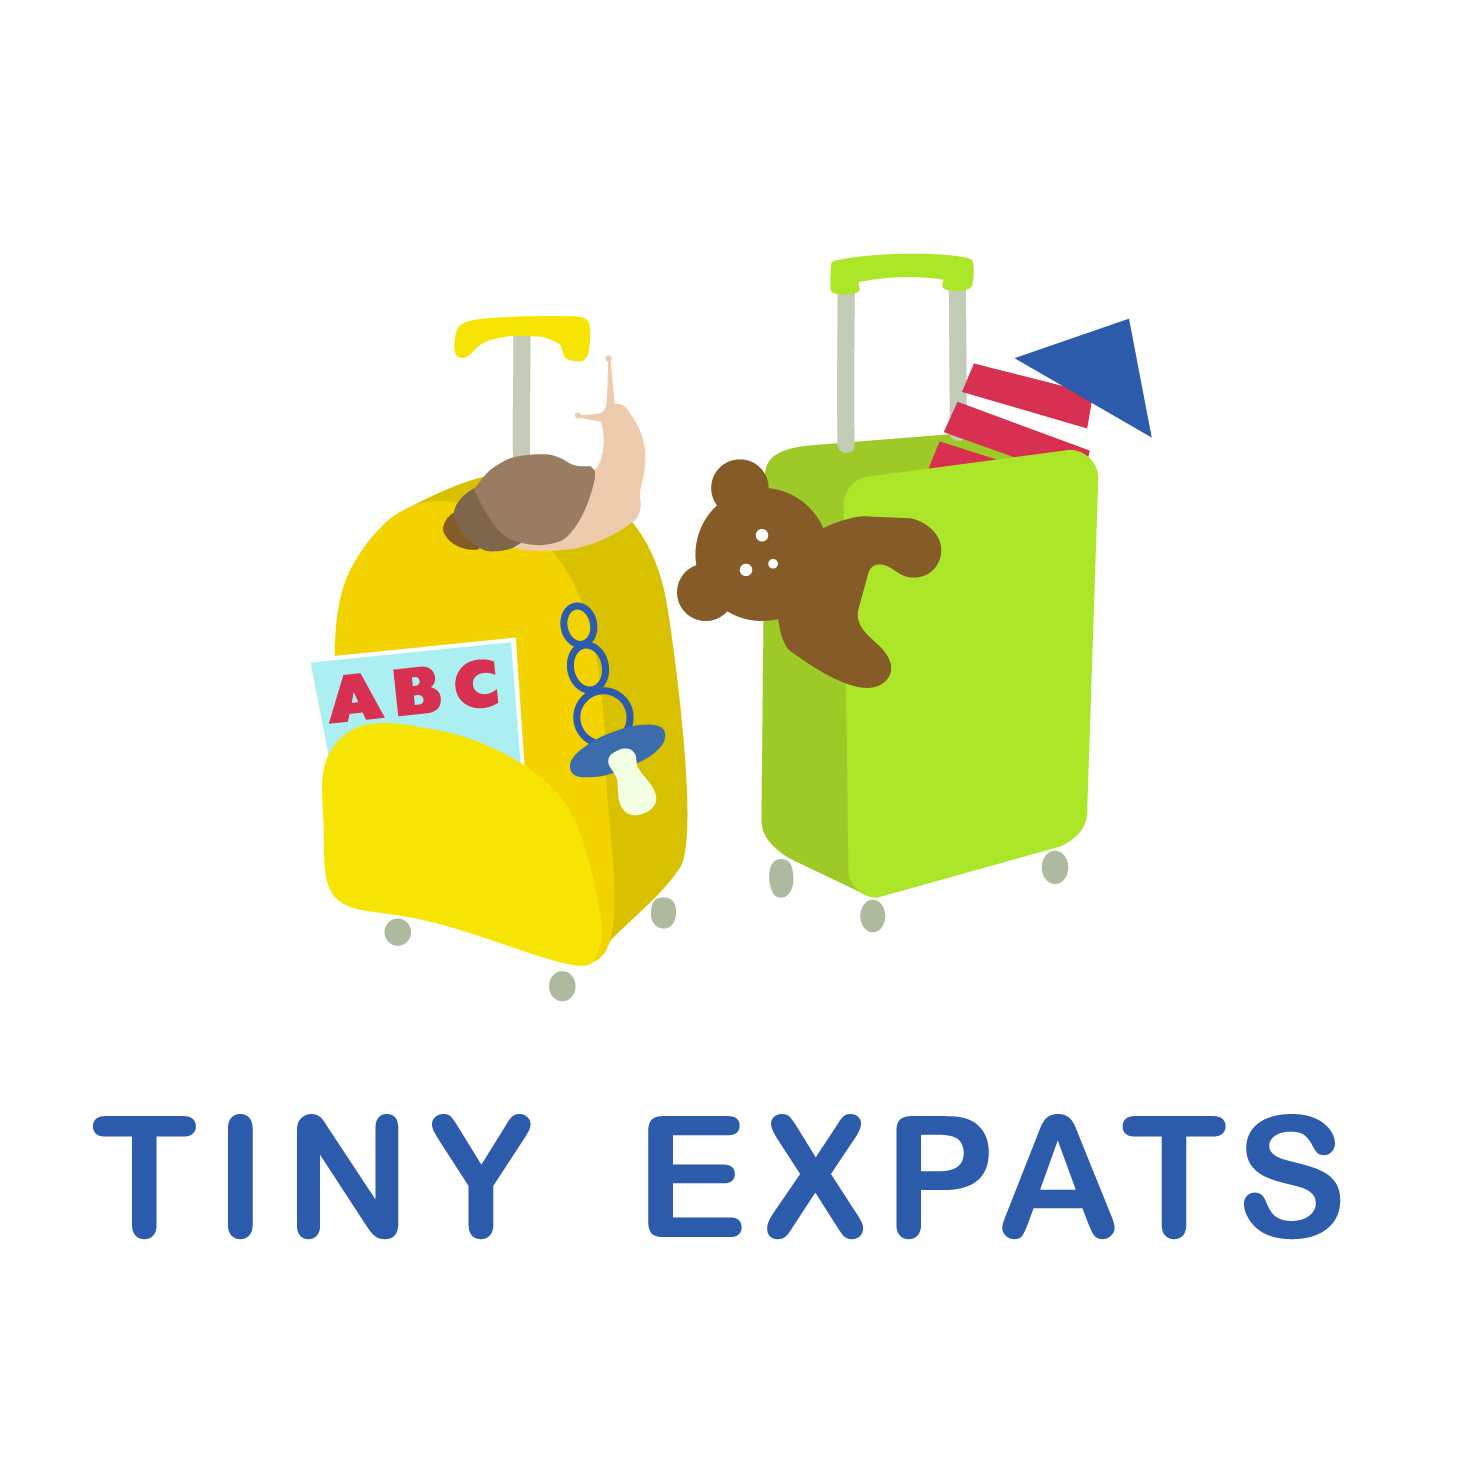 New design for Tiny Expats!